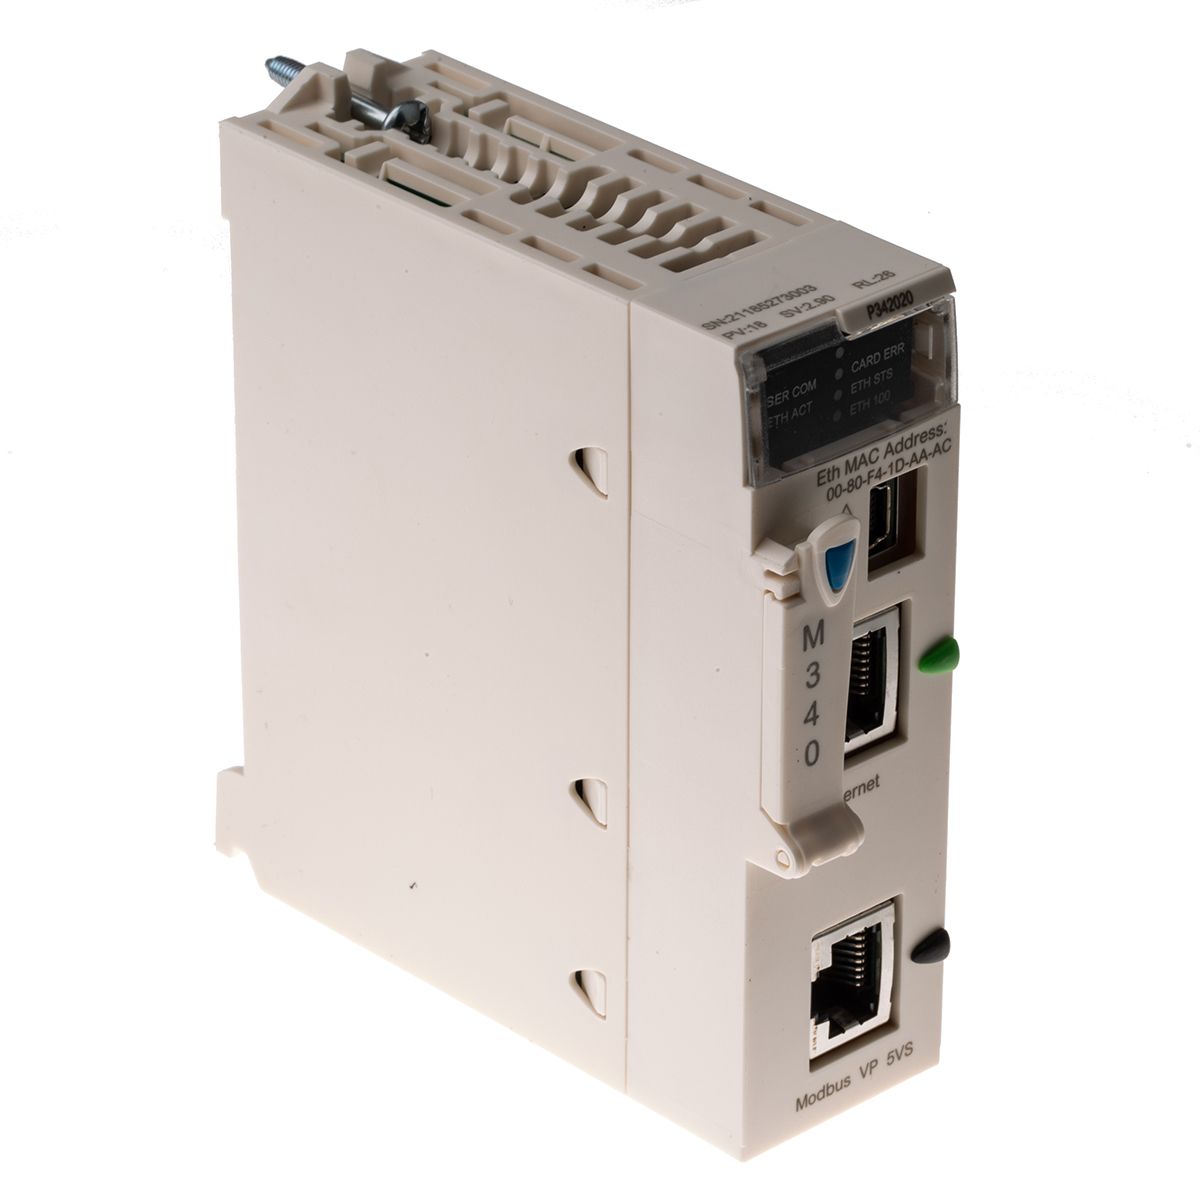 Schneider Electric PLC Expansion Module for use with Modicon M340, Analogue, Discrete, Analogue, Discrete